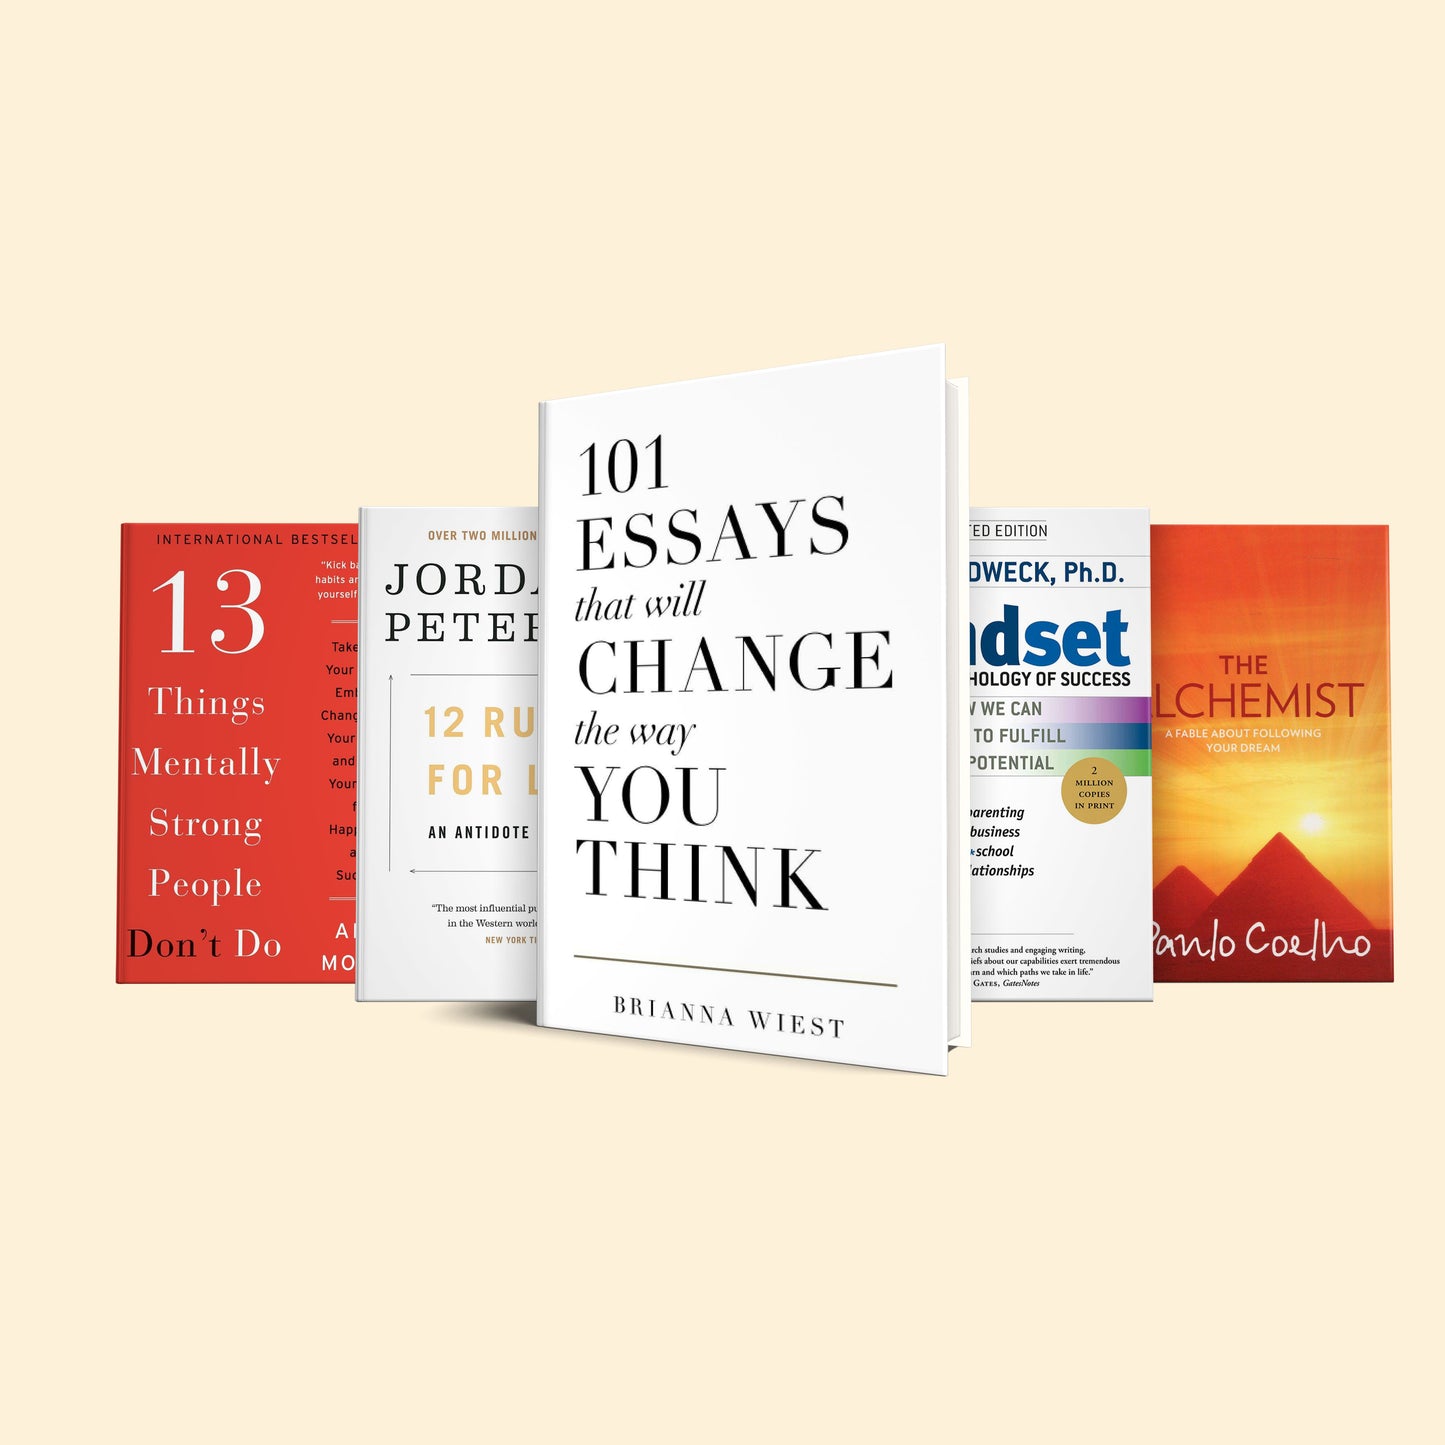 5 Books set that will make you embrace your potential : 101 essays, Mindset the new psychology, 12 rules for life, Alchemist,13 things mentally strong